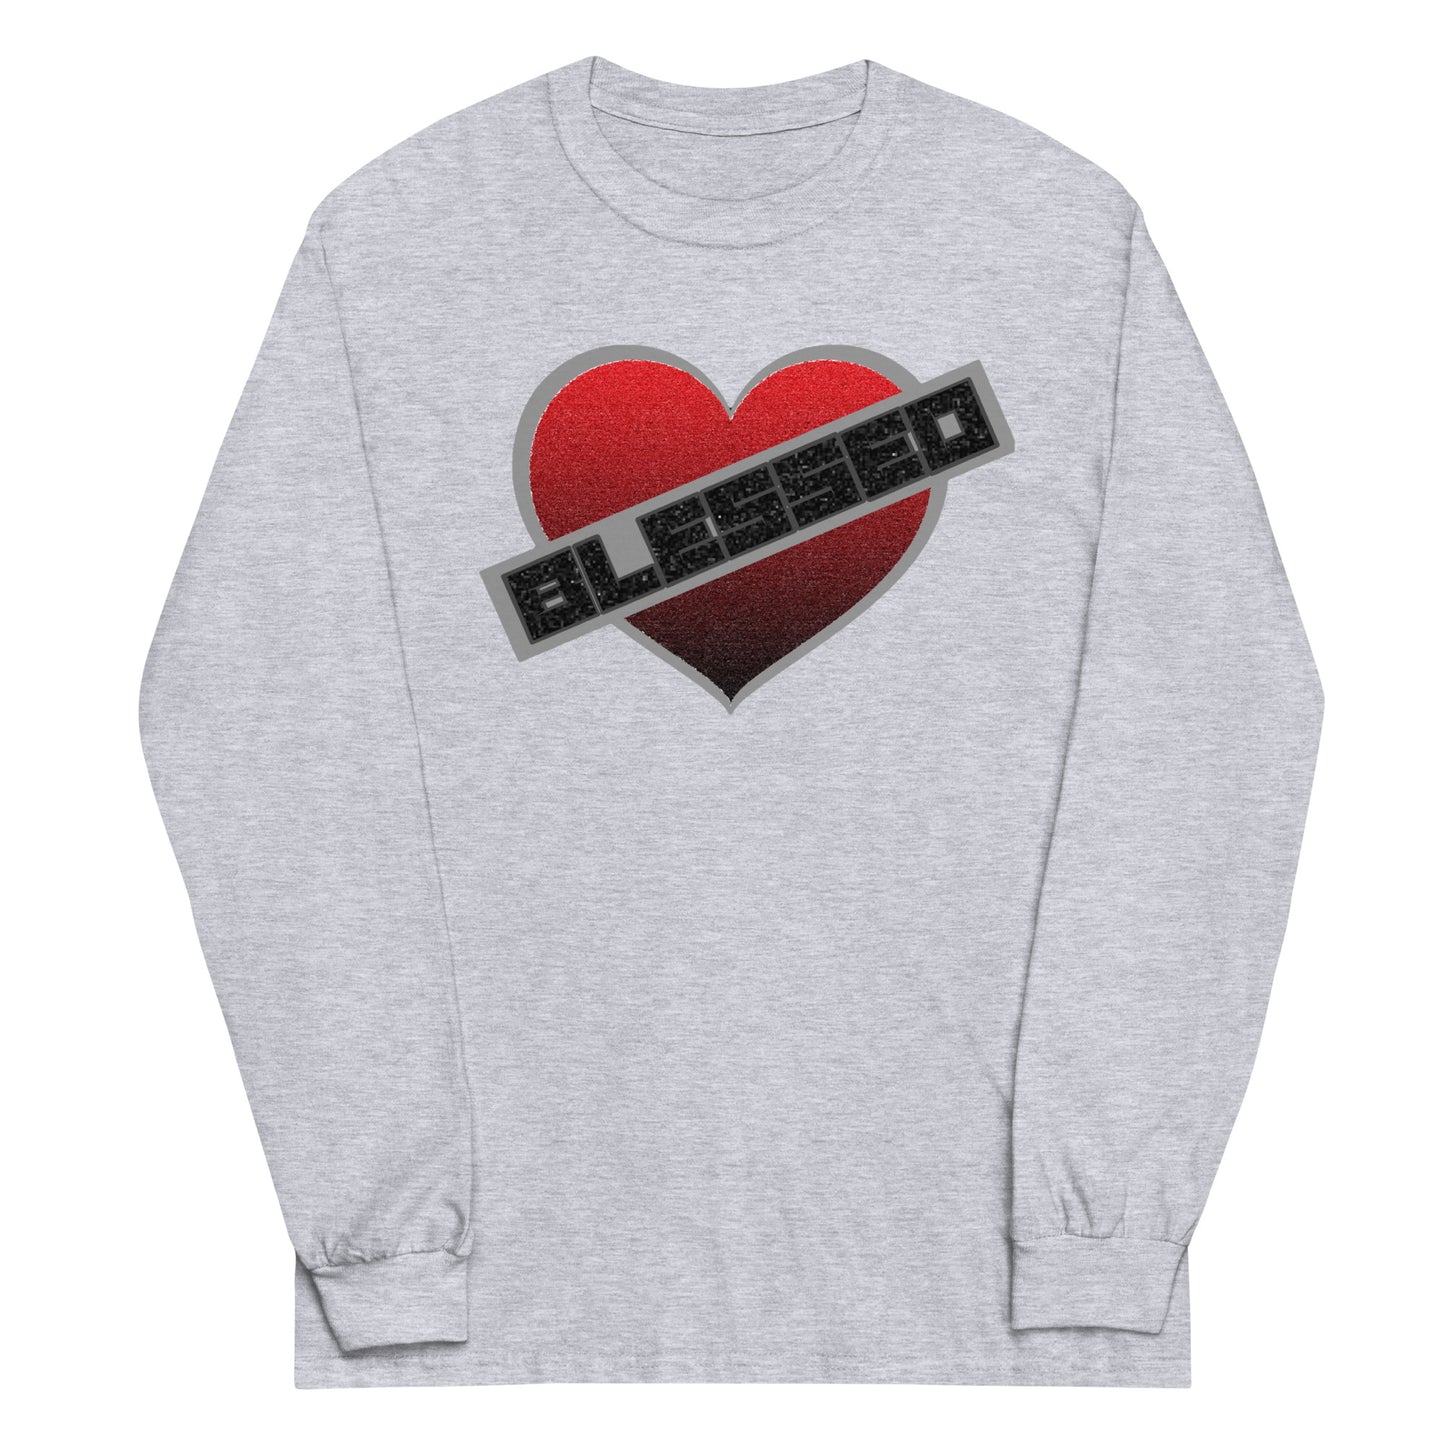 BLESSED LOVE LONG SLEEVES T-SHIRT